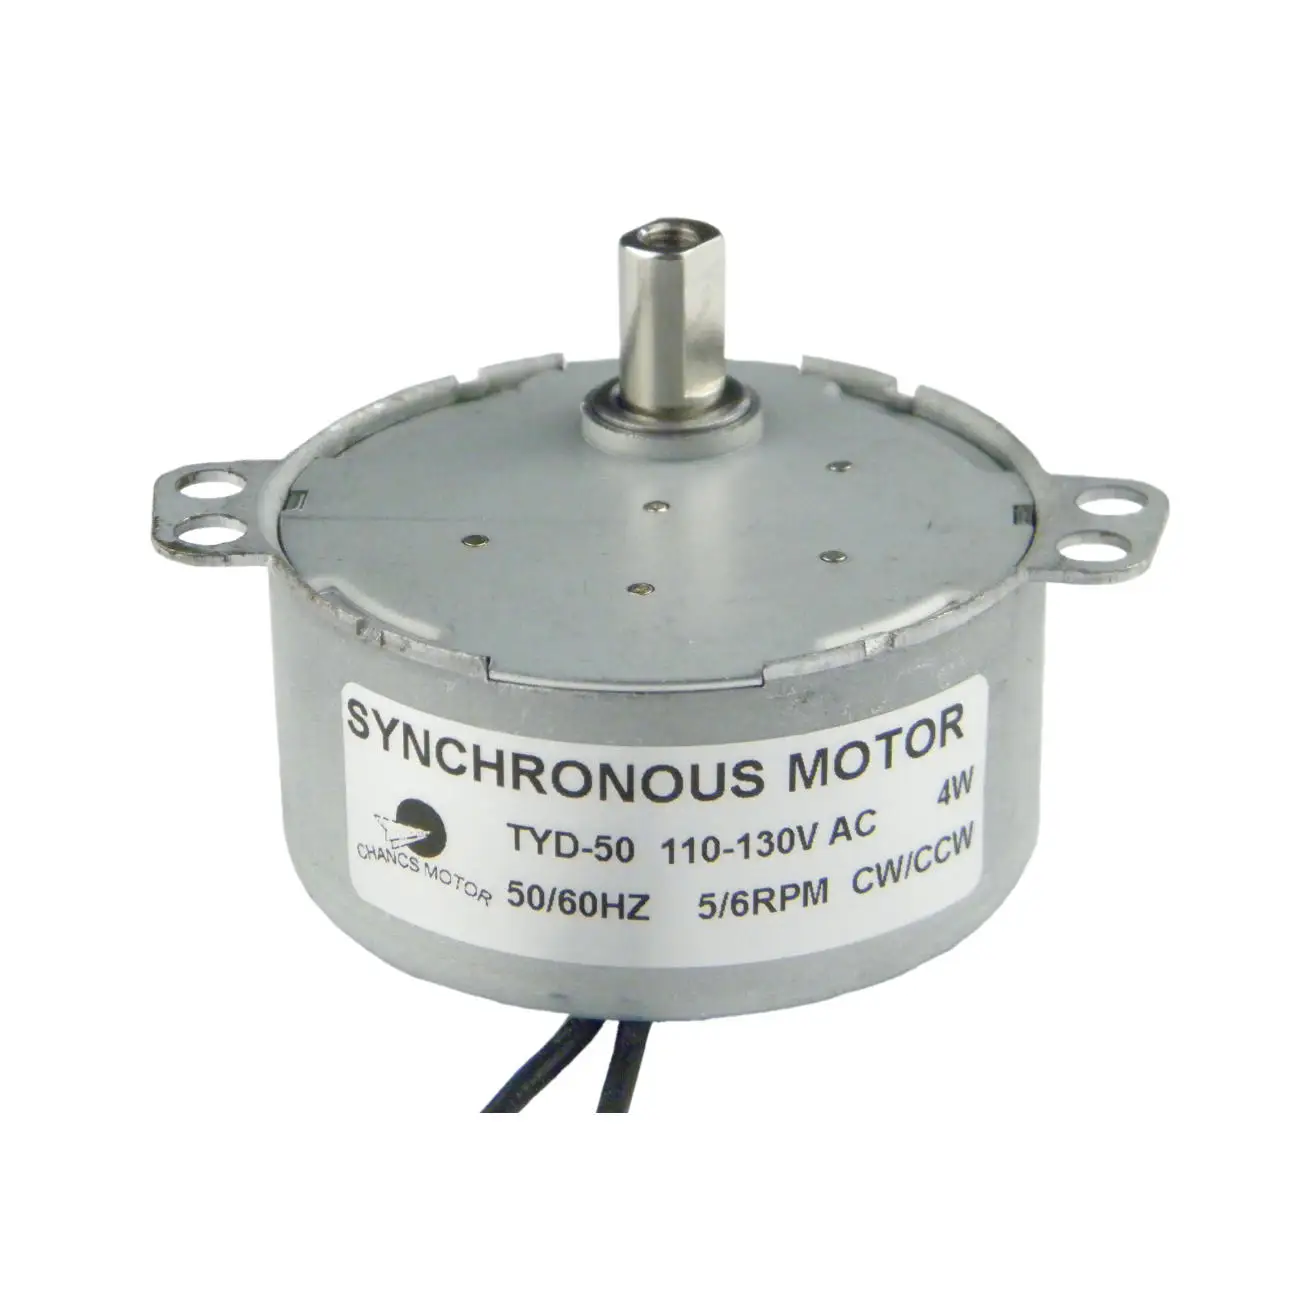 CHANCS TYC-50 Small Synchronous Electric Motor AC 110V 2.5-3RPM CCW Torque 8Kg.cm Gear Motor CHANCS MOTOR CECOMINOD030336